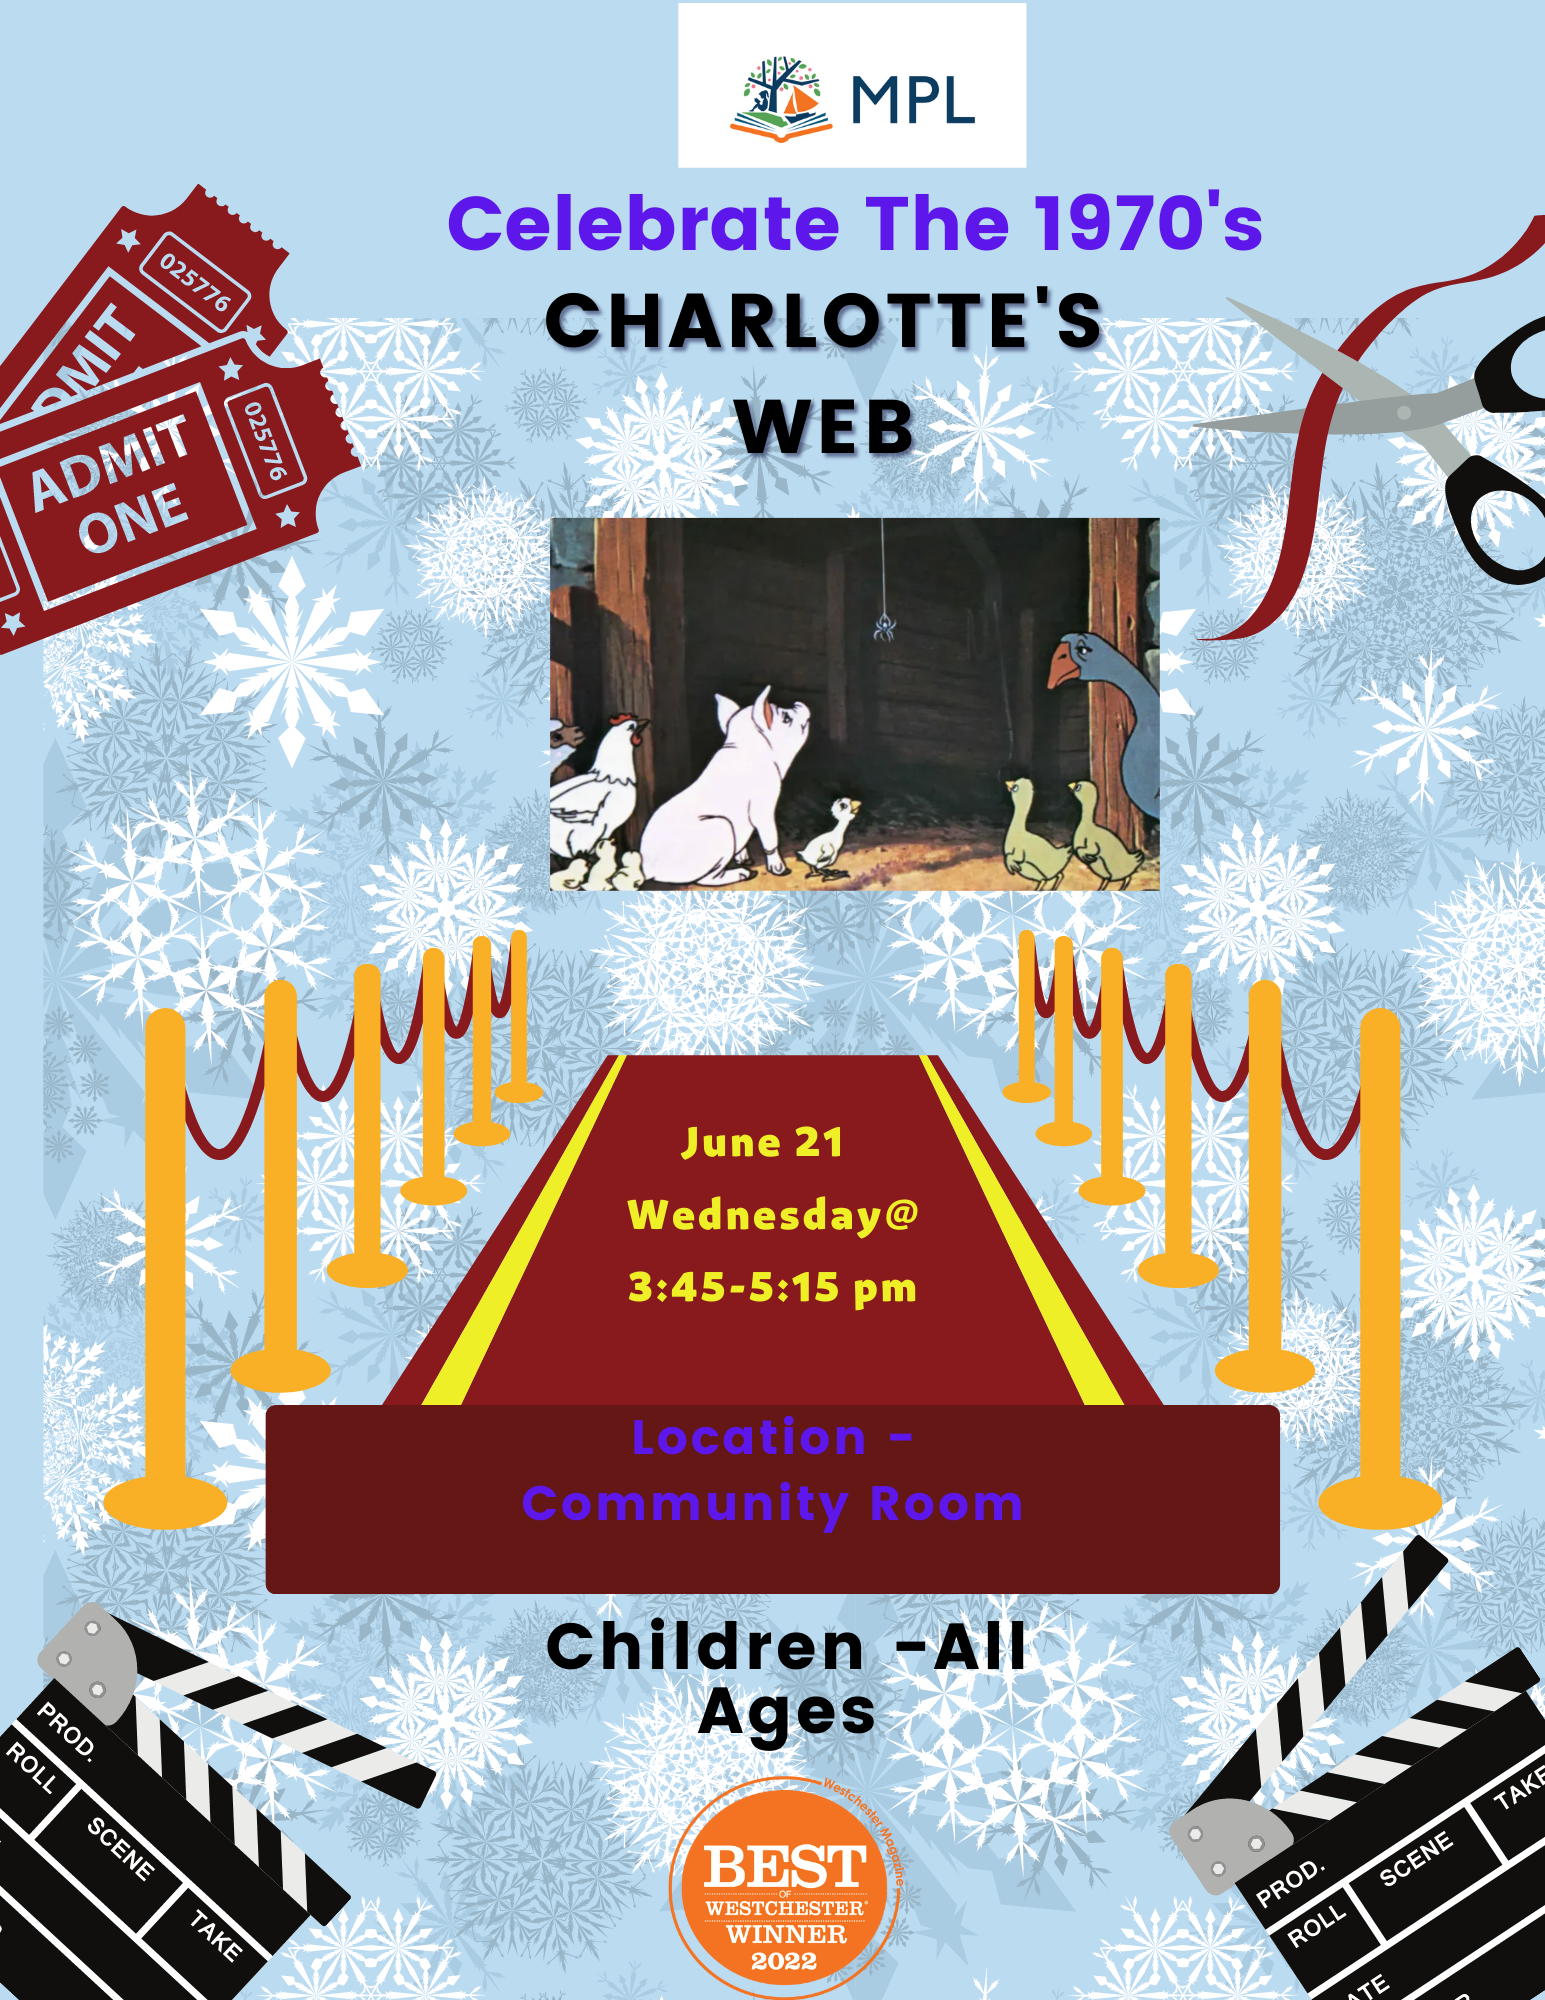 6/21 @ 3:45 - 5:15 in the Community Room - movie: Charlotte's Web (for children)